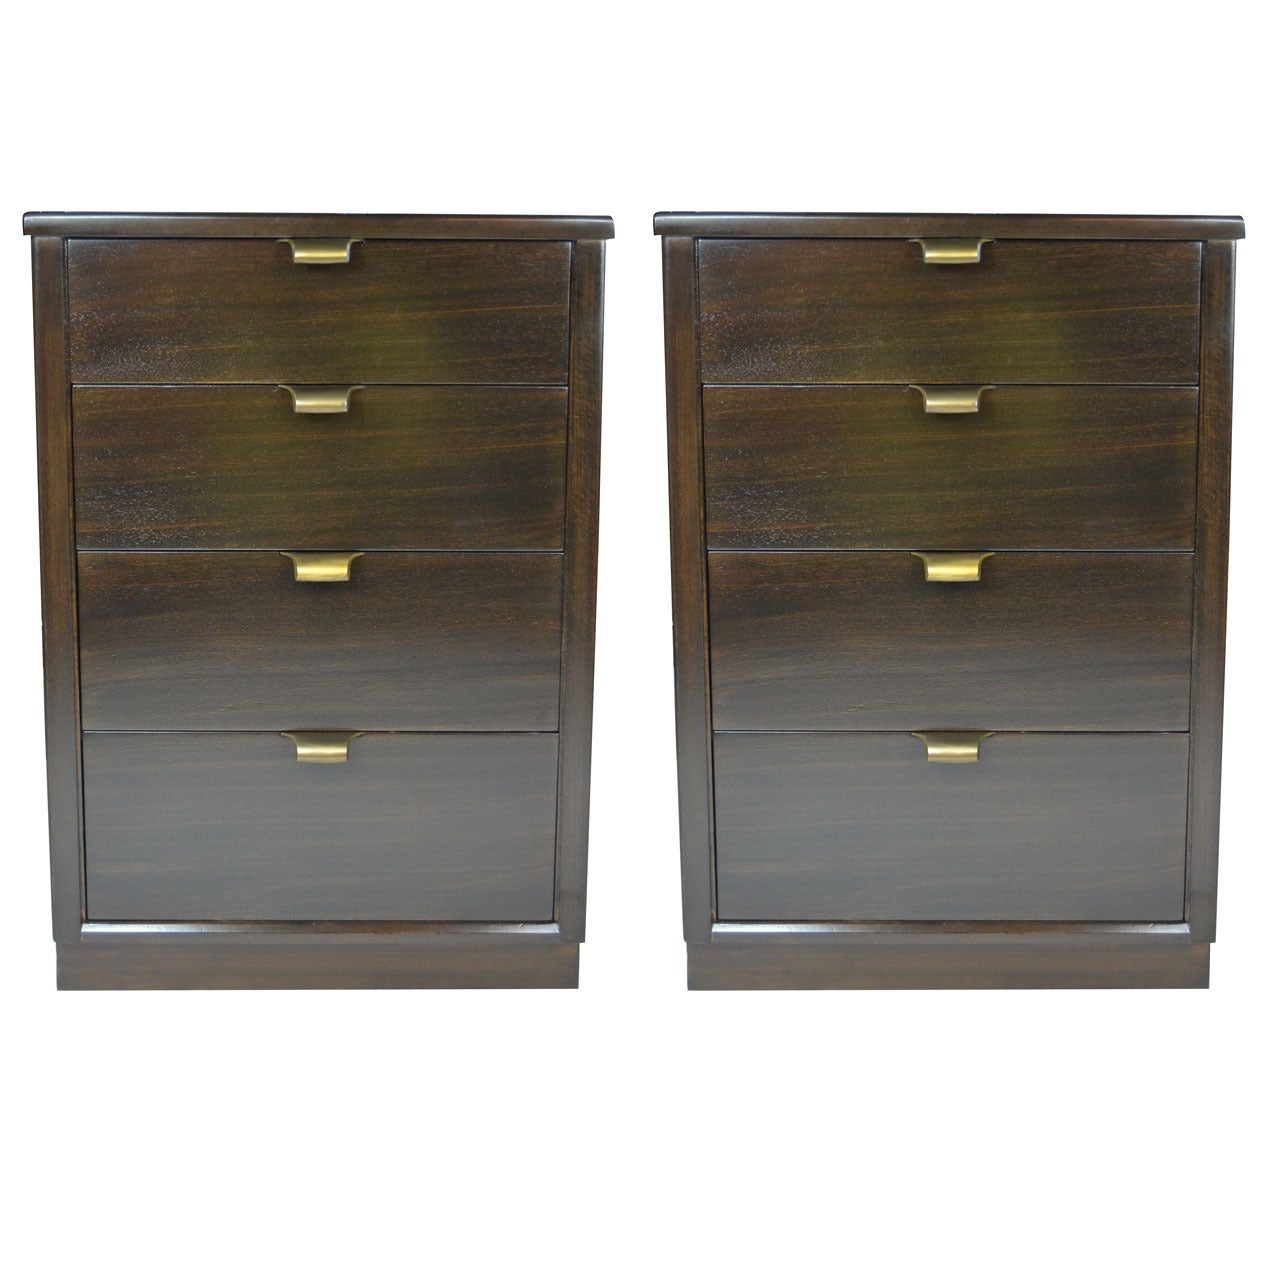 Pair of Night Stands or Chests by Edward Wormley